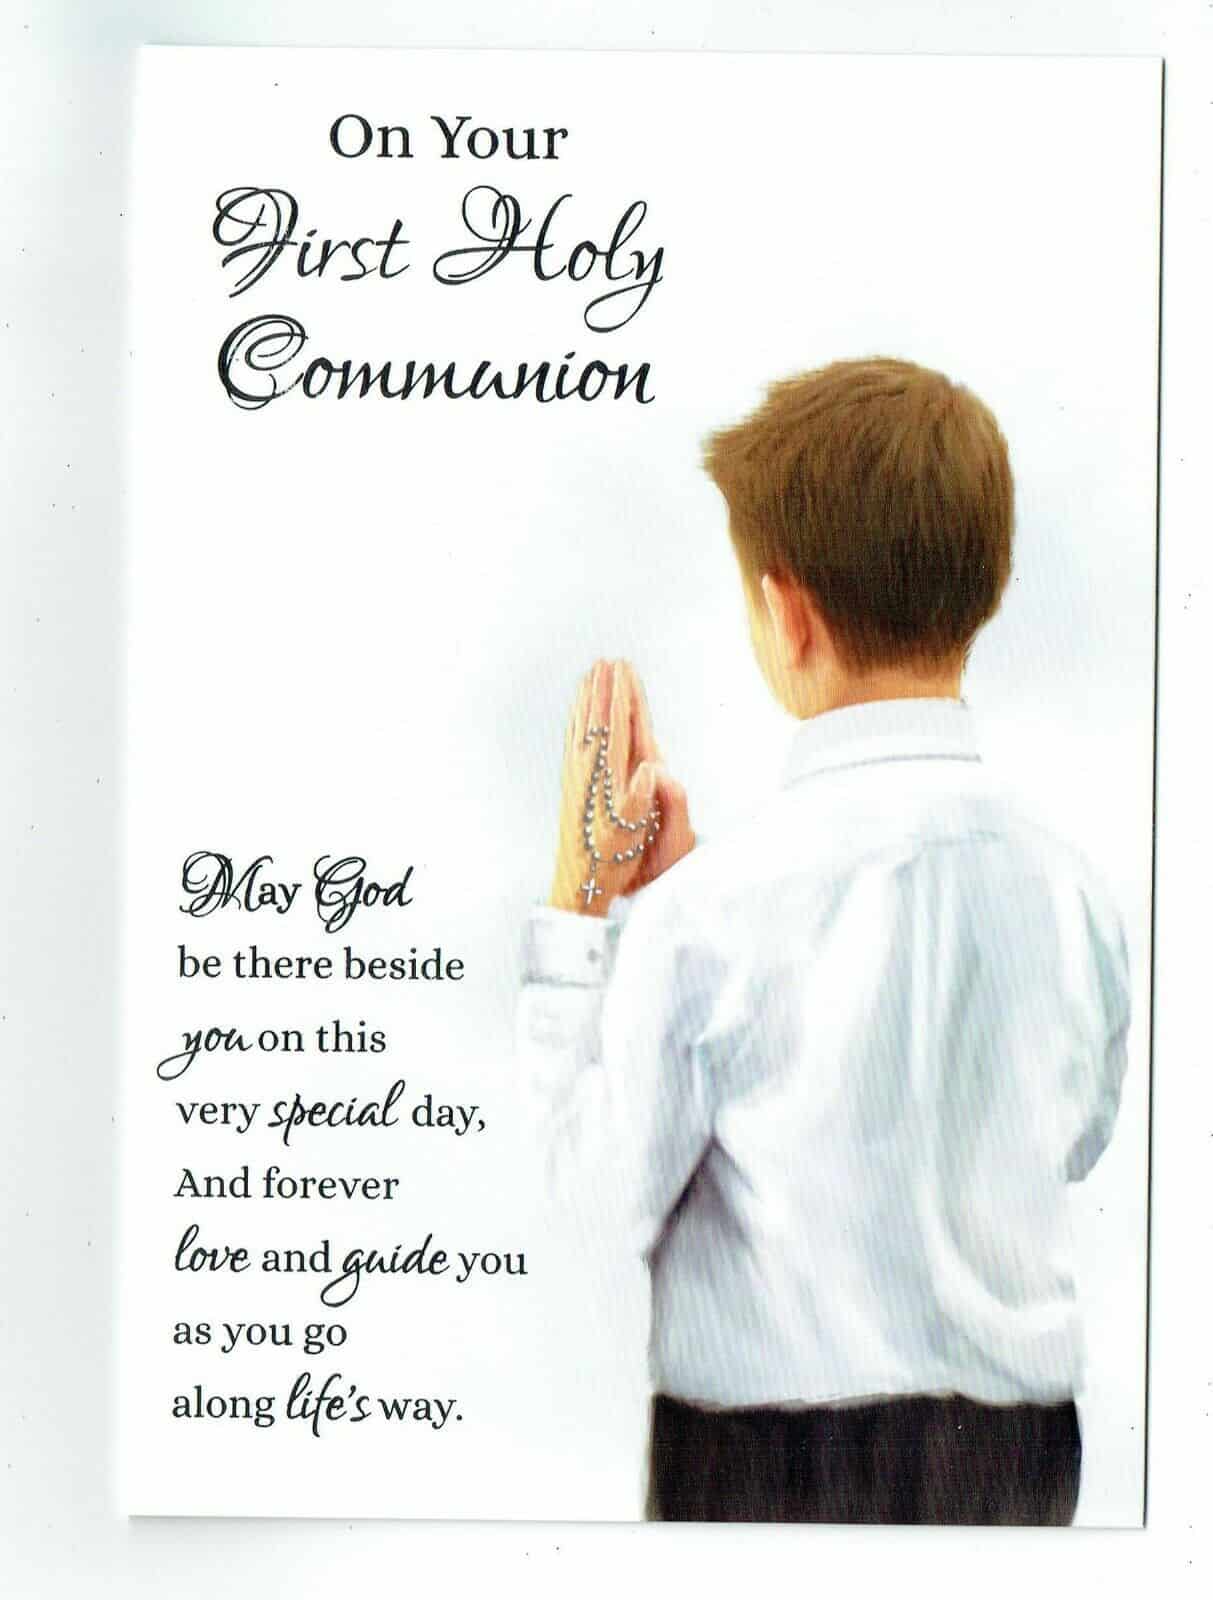 Variation of First Holy Communion Card SPECIAL WISHES ON YOUR FIRST HOLY COMMUNION 283422072719 